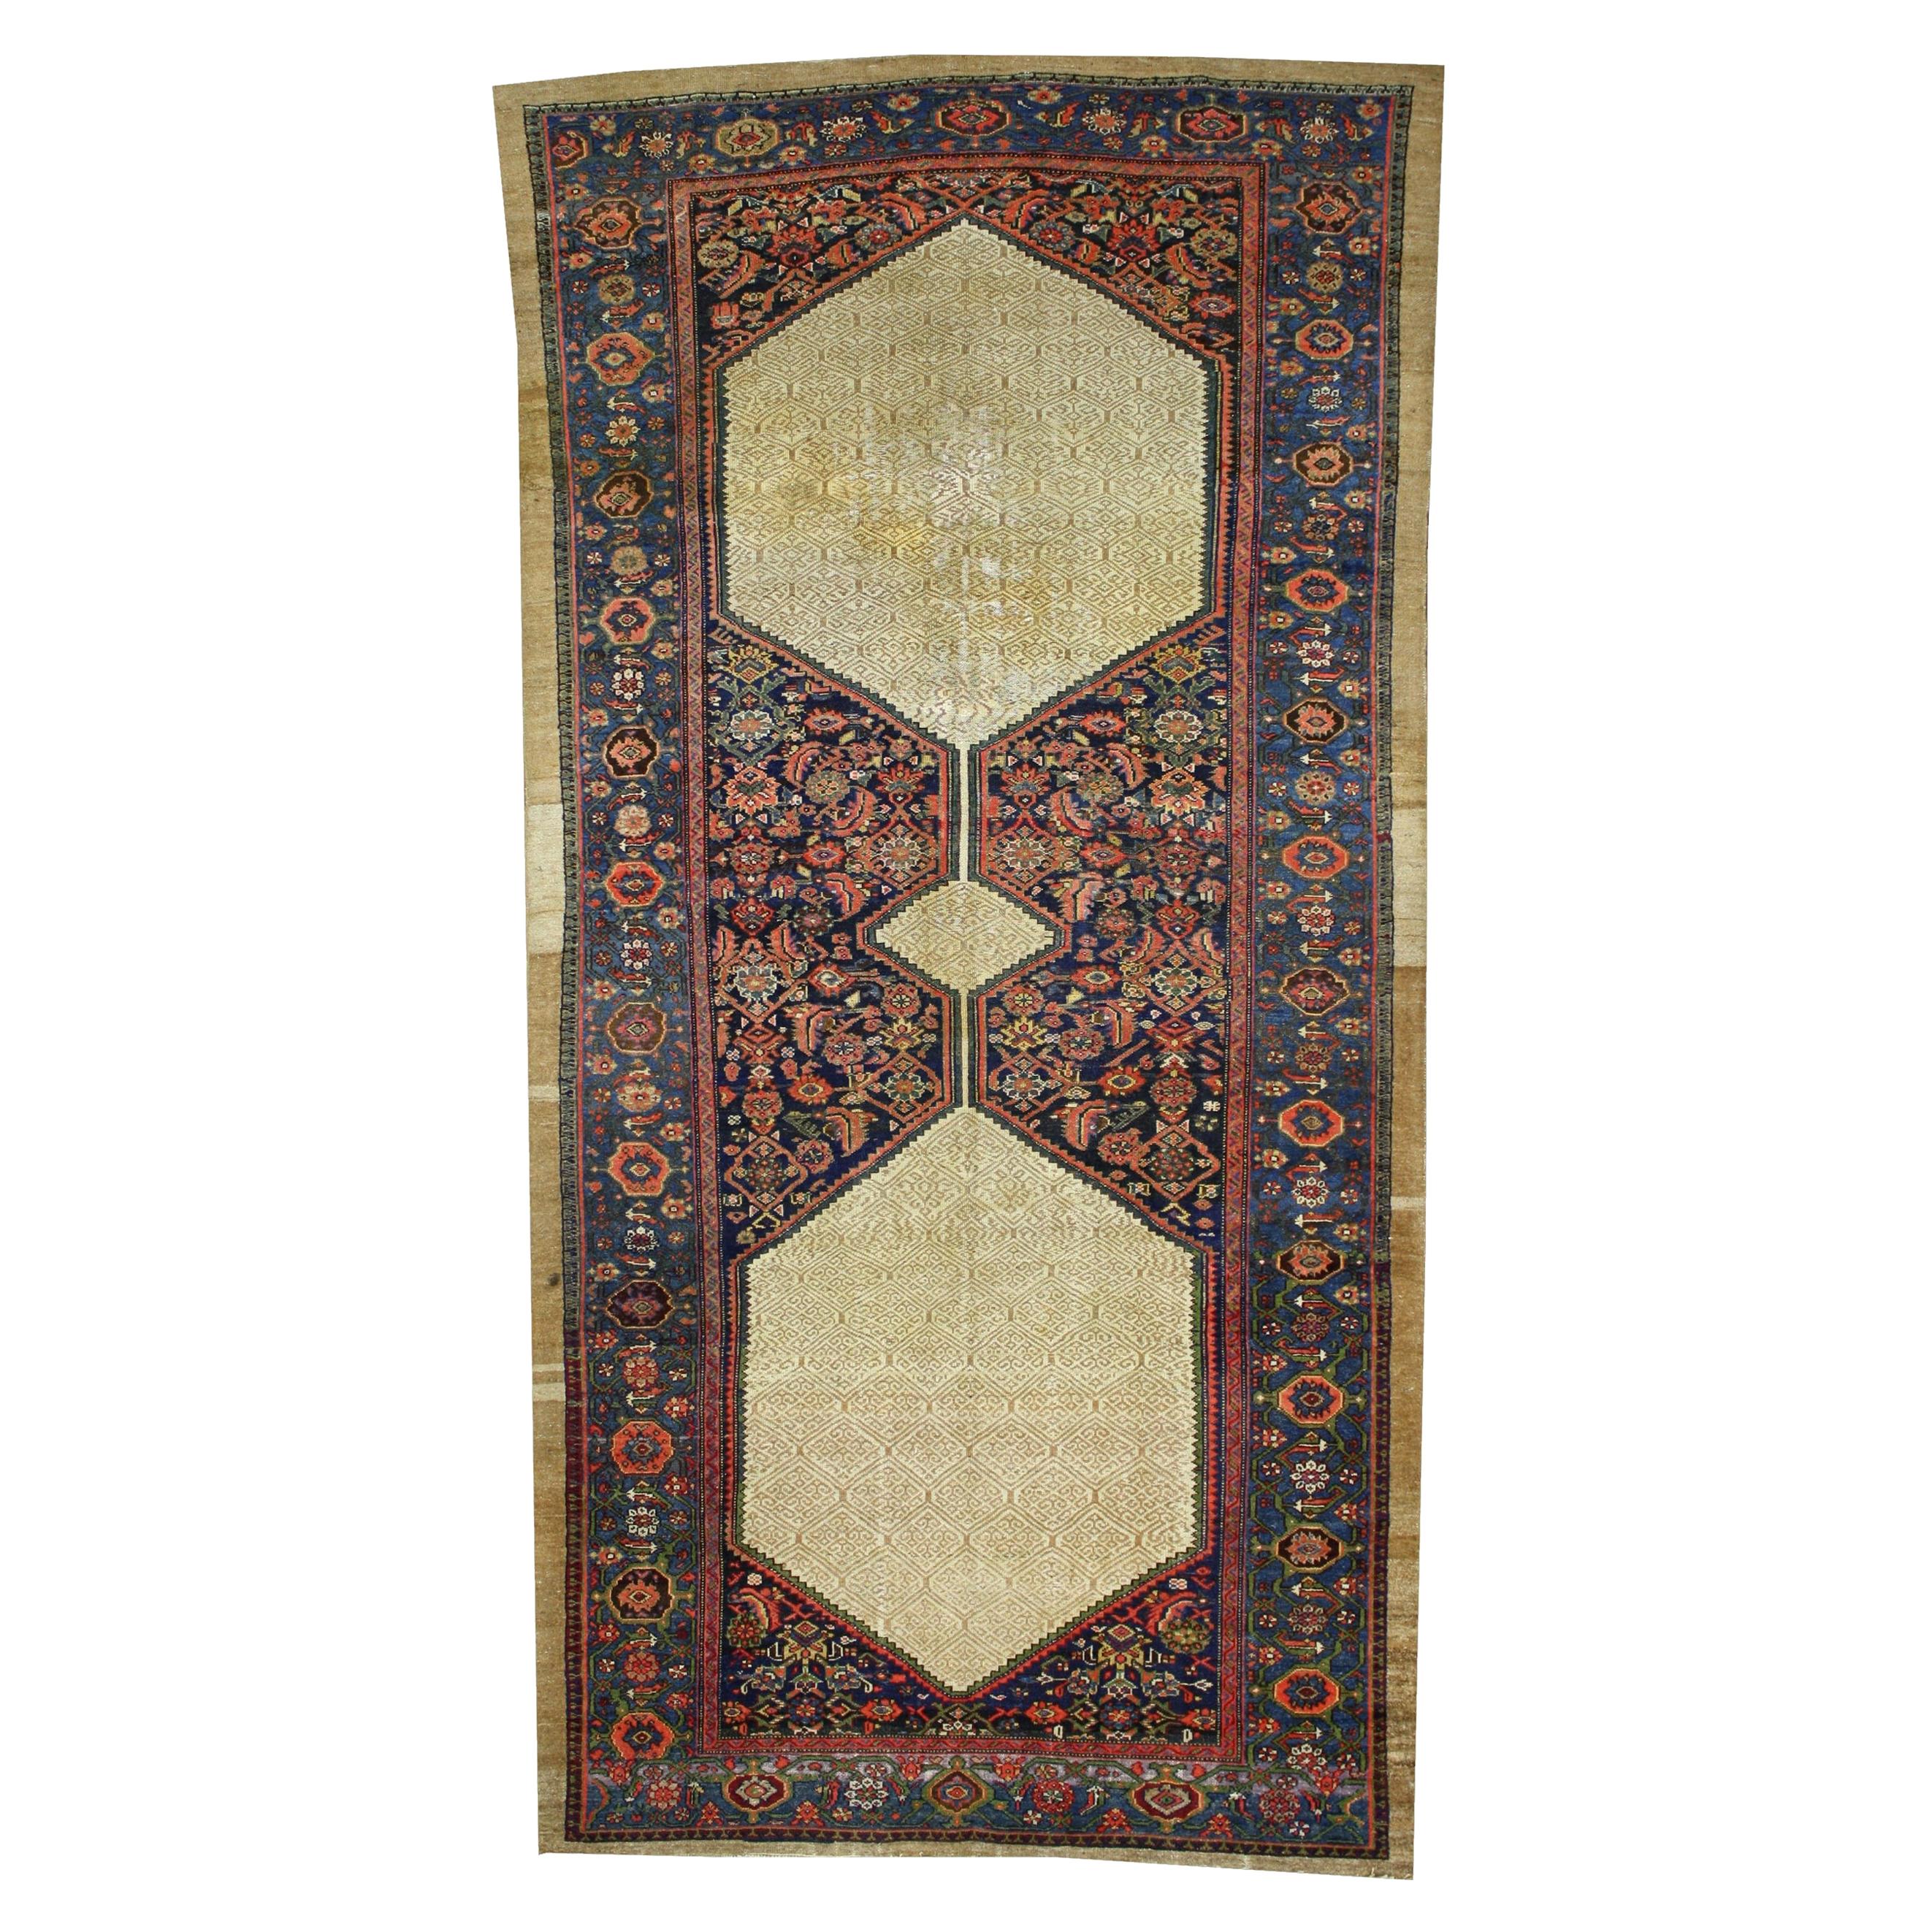 Distressed Antique Persian Malayer Gallery Rug with Camel Hair